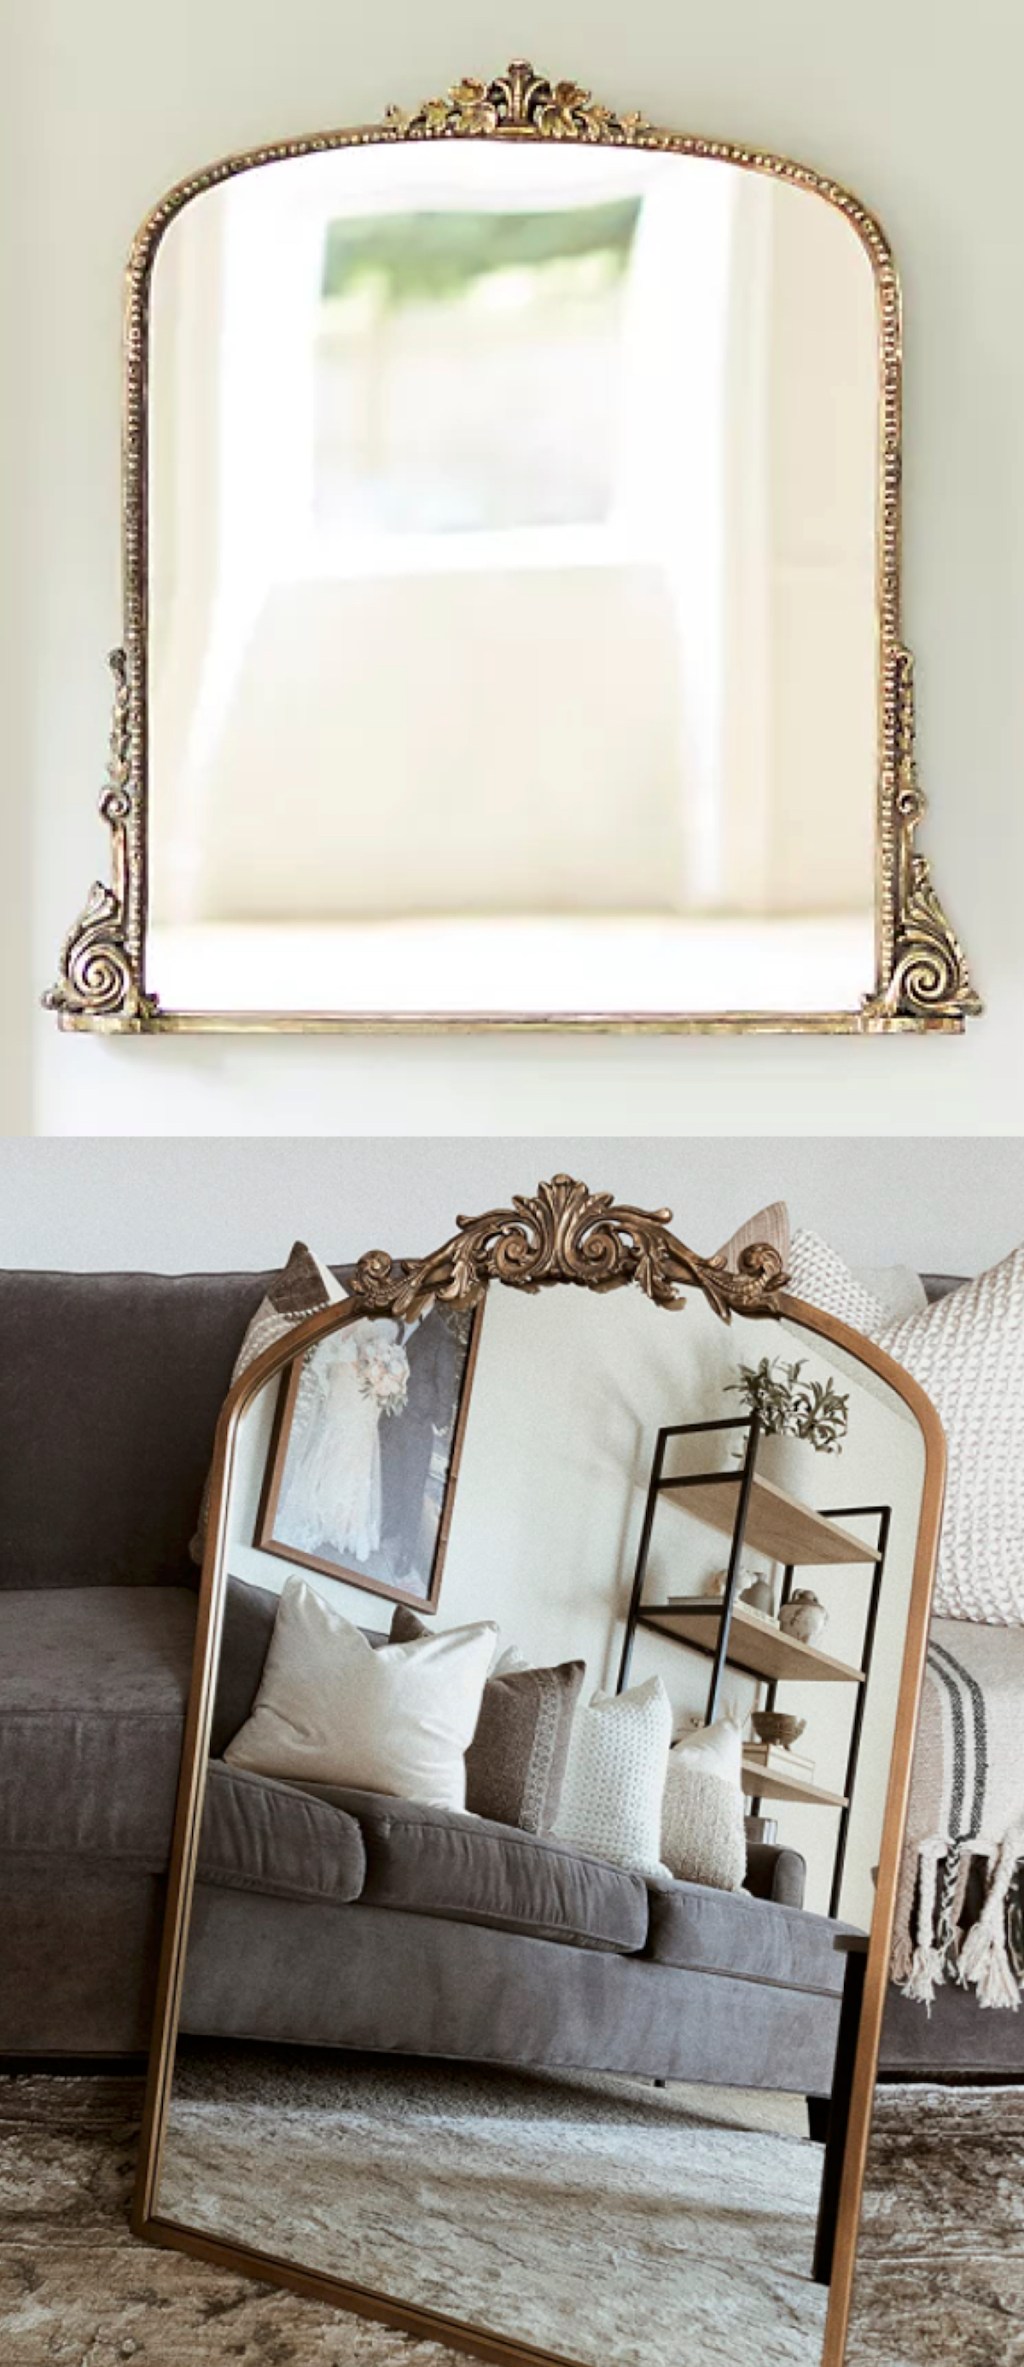 two gold antique mirrors with reflections on glass